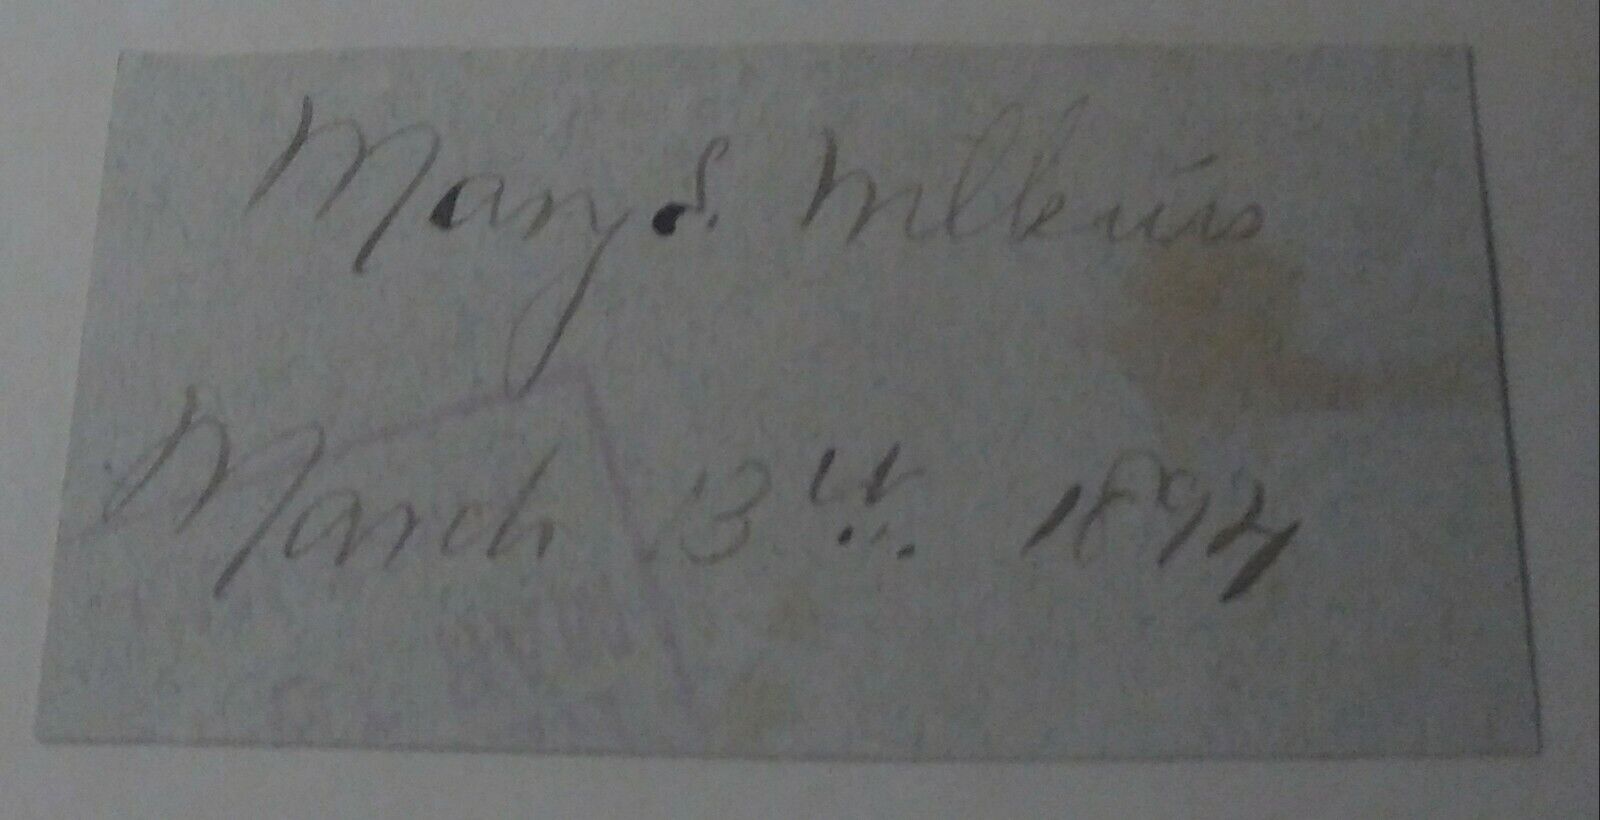 RARE AUTOGRAPH MARY E. WILKINS SIGNED AND DATED 1894 WROTE. \